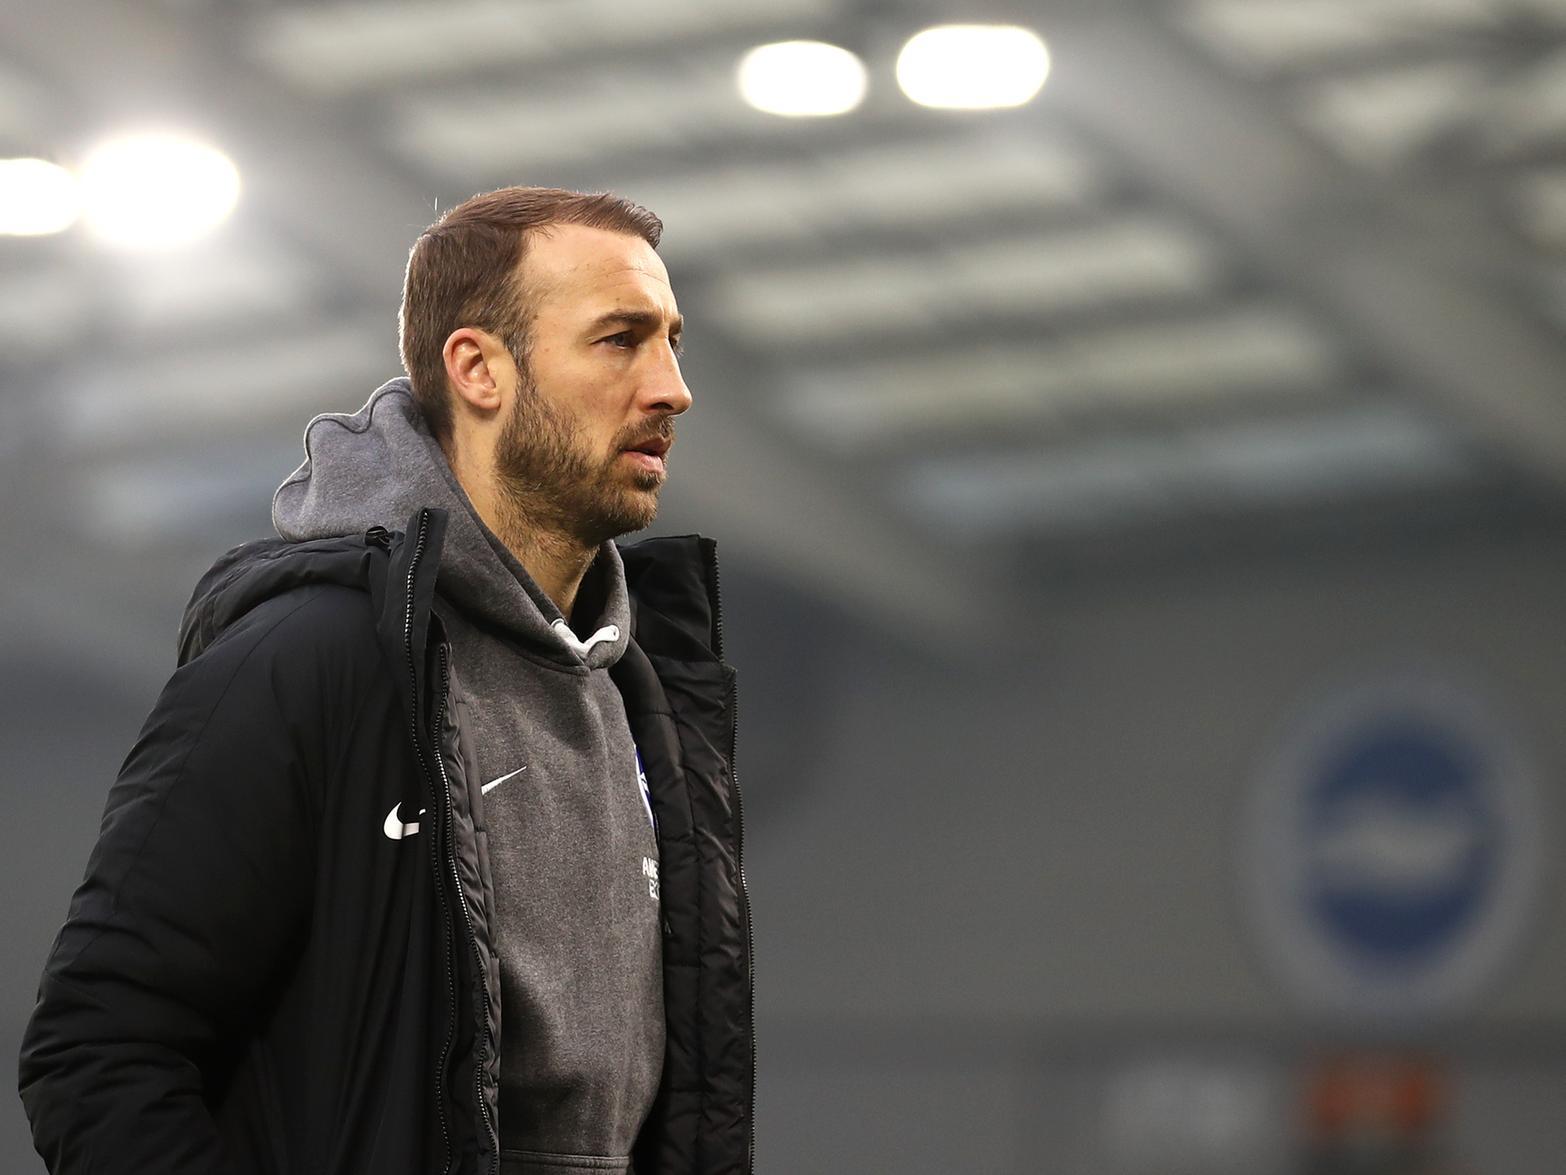 Leeds United are joint-third favourites with the bookies to sign Brighton striker Glenn Murray in January, although Nottingham Forest or Reading are more likely destinations. (Sky Bet)